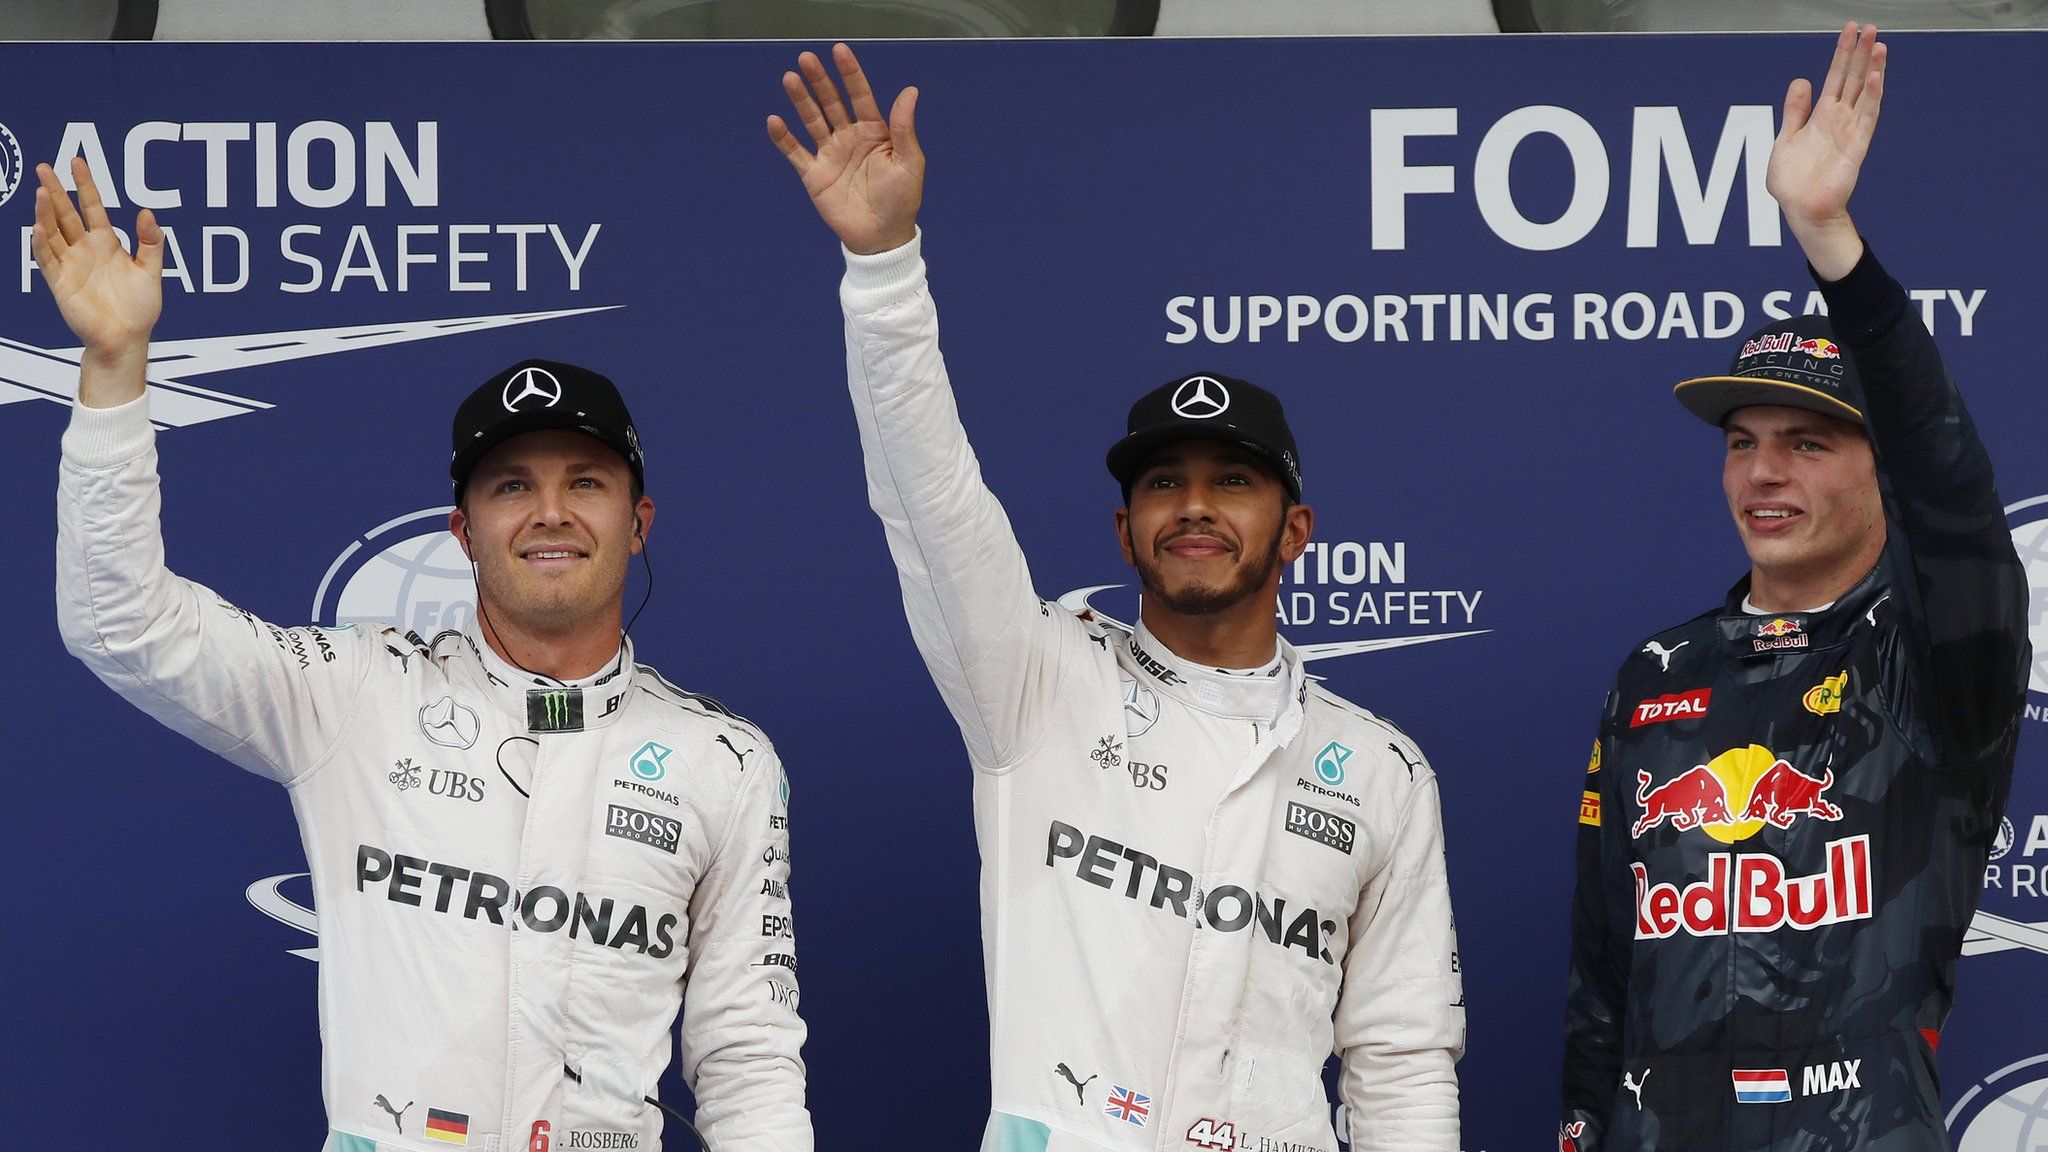 Lewis Hamilton qualifies on pole, Nico Rosberg second and Max Verstappen third